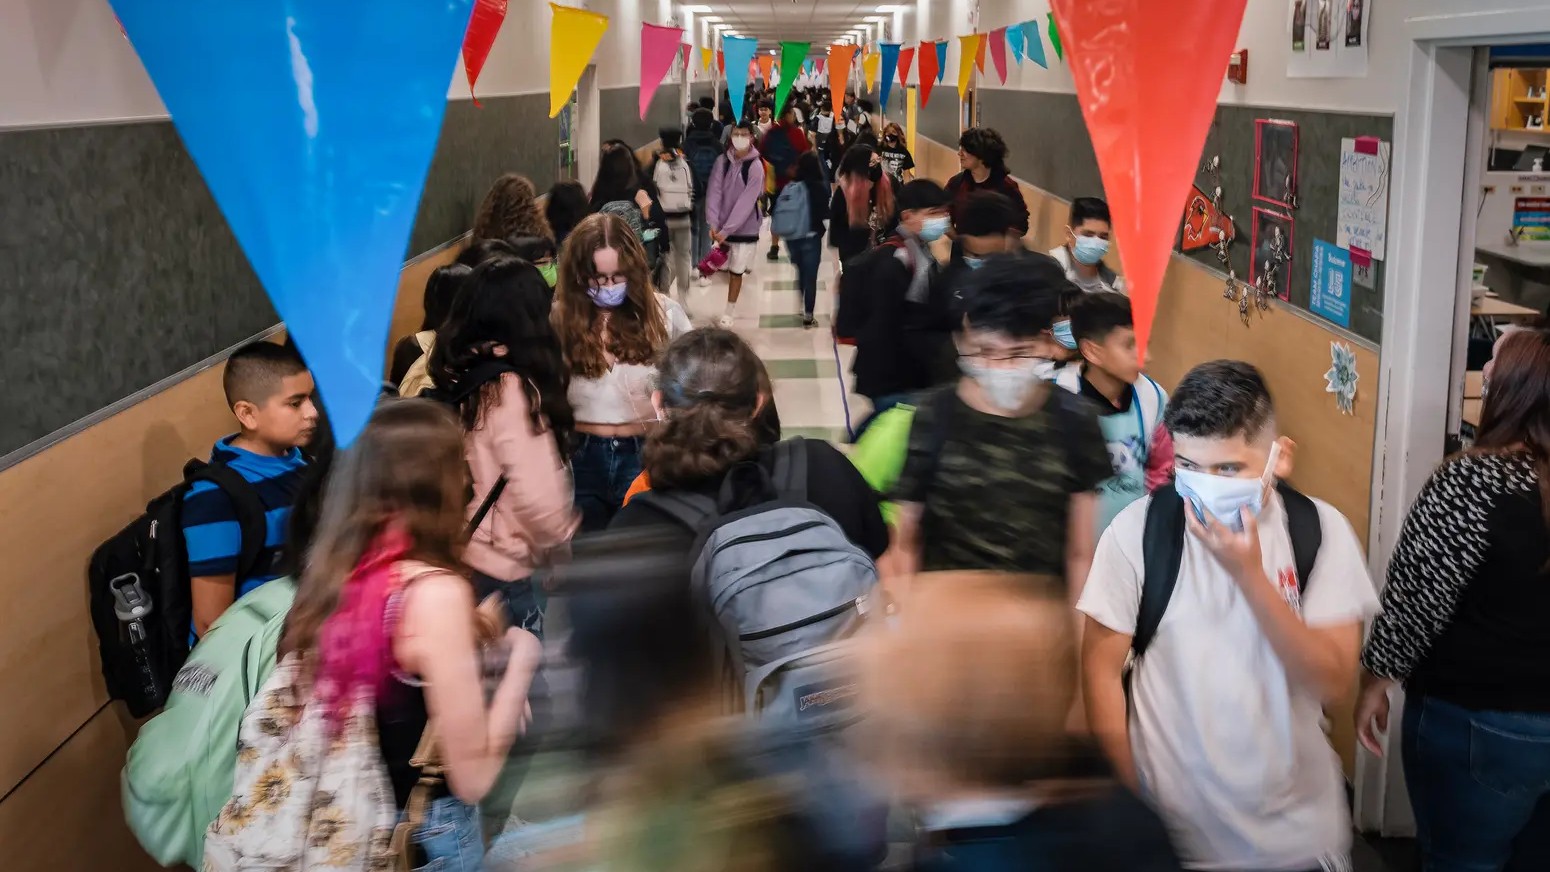 A busy hallway bedecked with flags is filled with students wearing backpacks and masks.